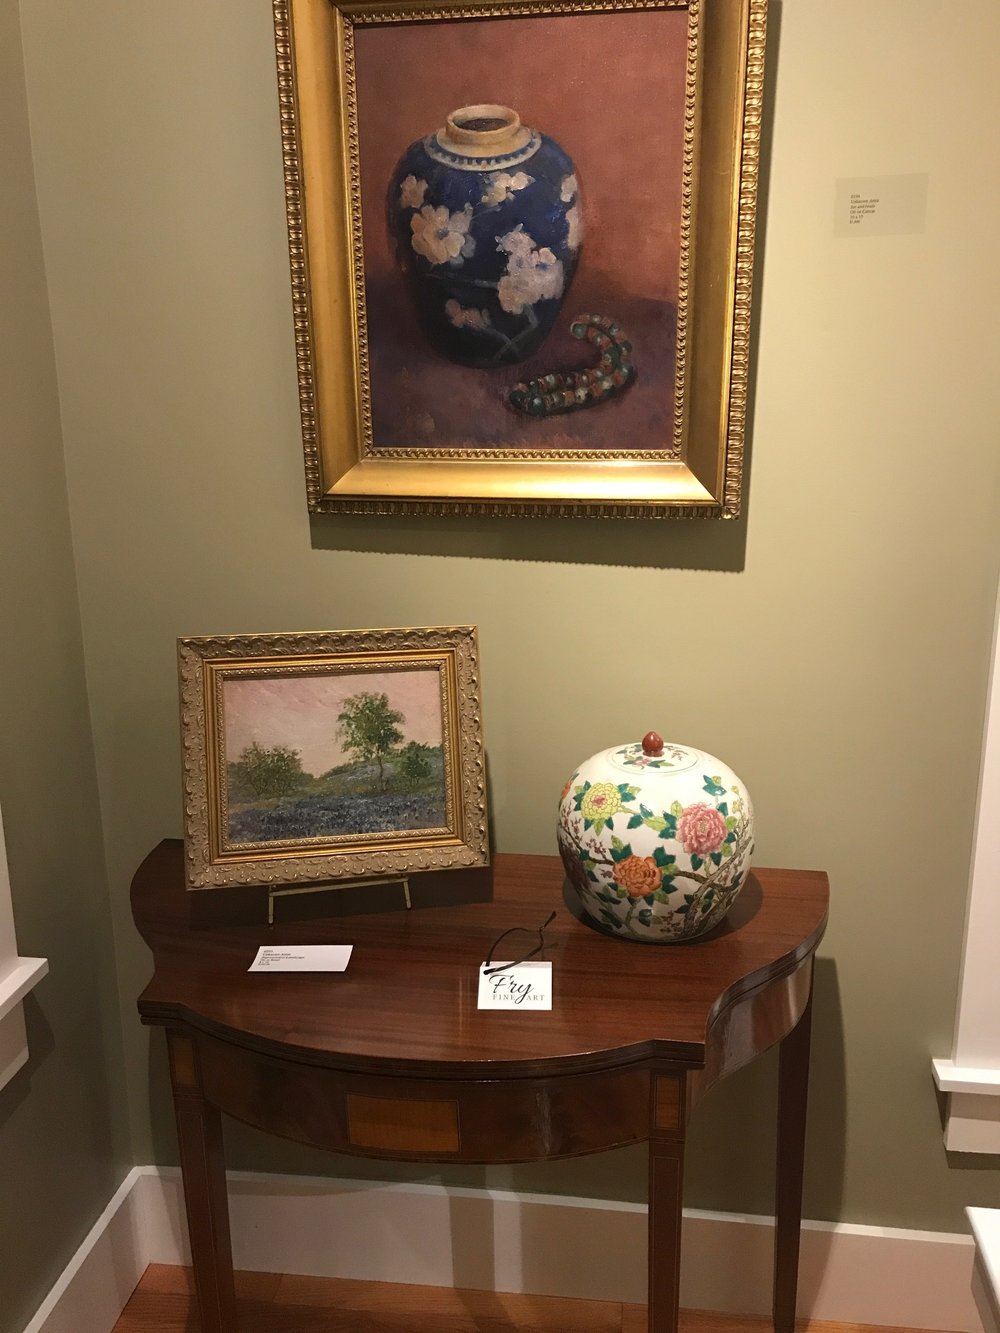 A collection of works from the Fry Fine Art Gallery in Peterborough, NH.